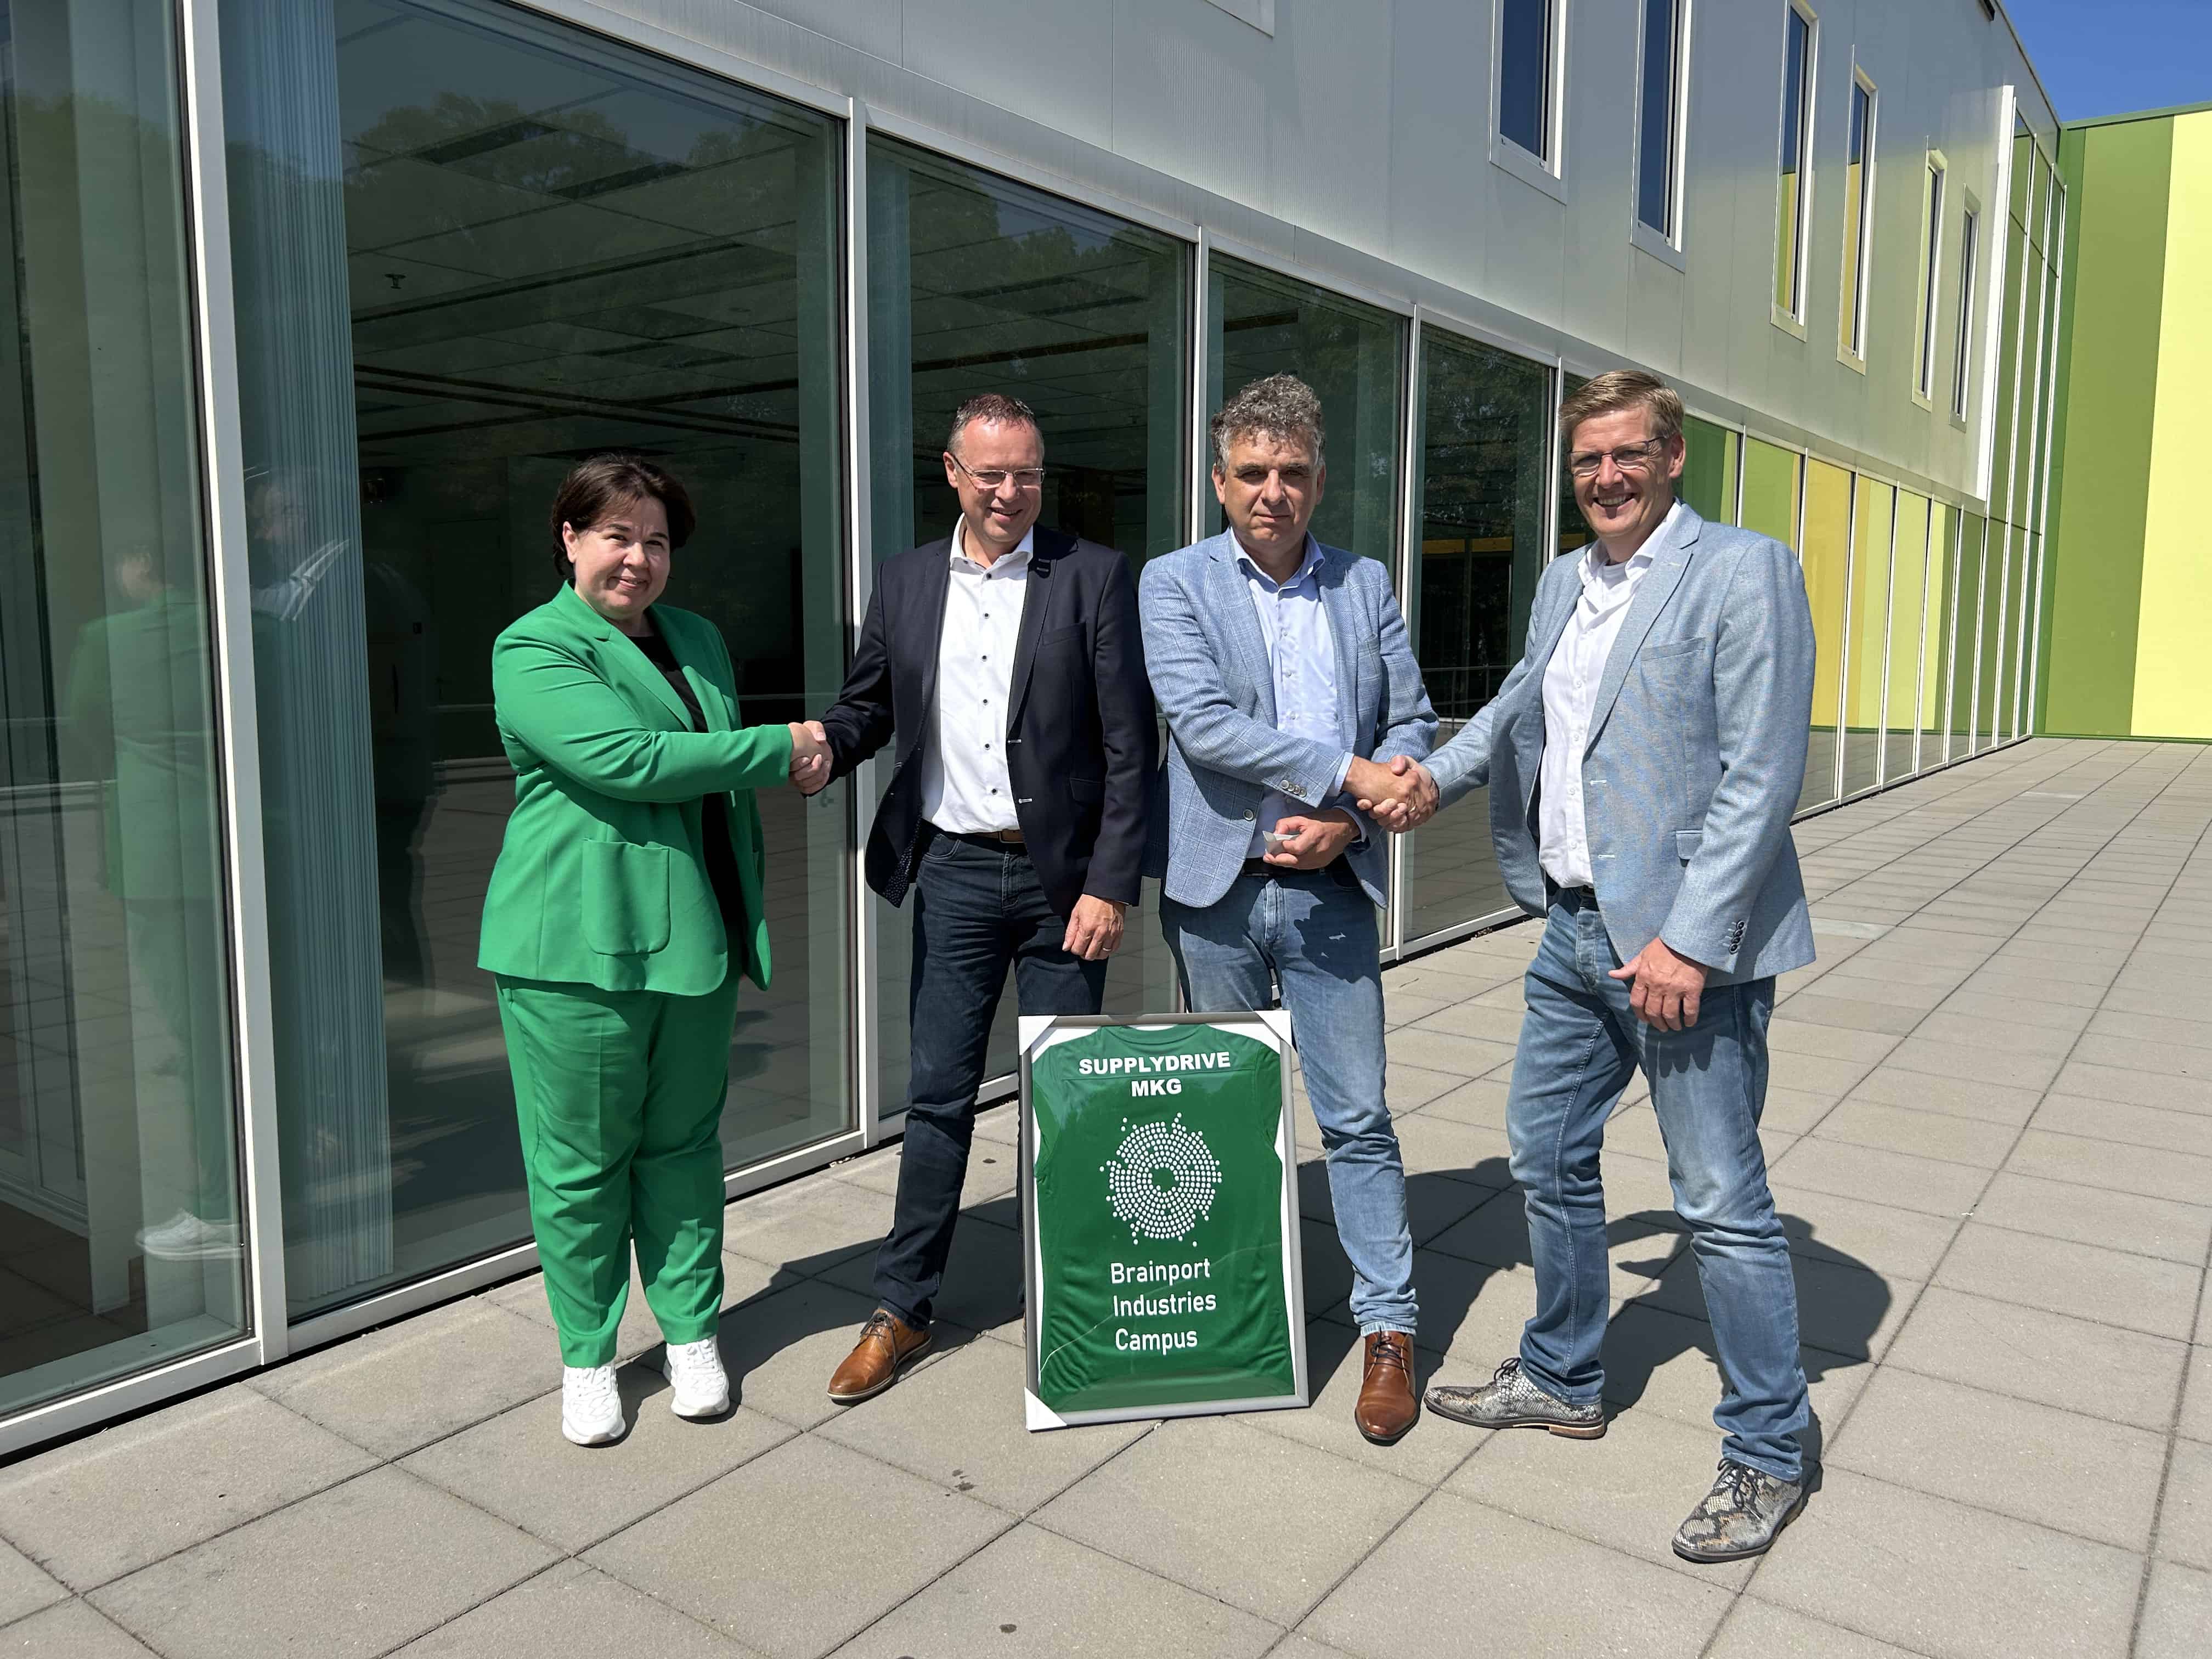 Brainport Industries Campus welcomes MKG Nederland and Supplydrive as new tenants